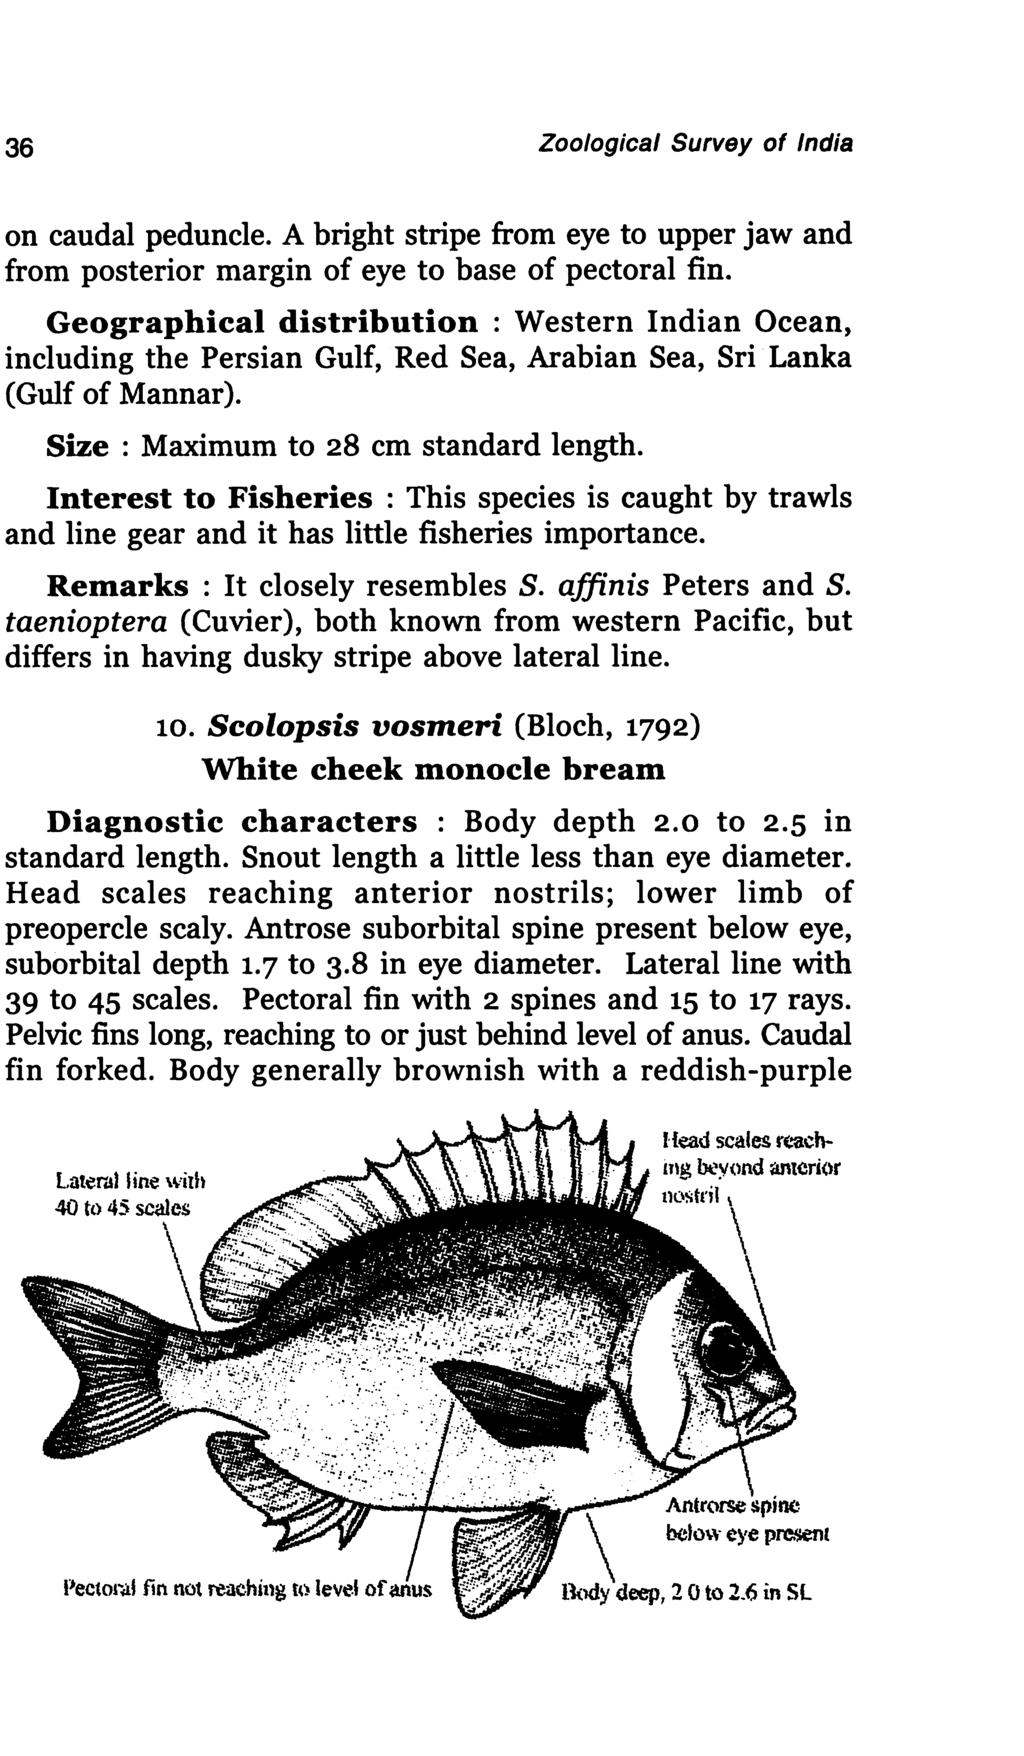 36 Zoological Survey of India on caudal peduncle. A bright stripe from eye to upper jaw and from posterior margin of eye to base of pectoral fin.